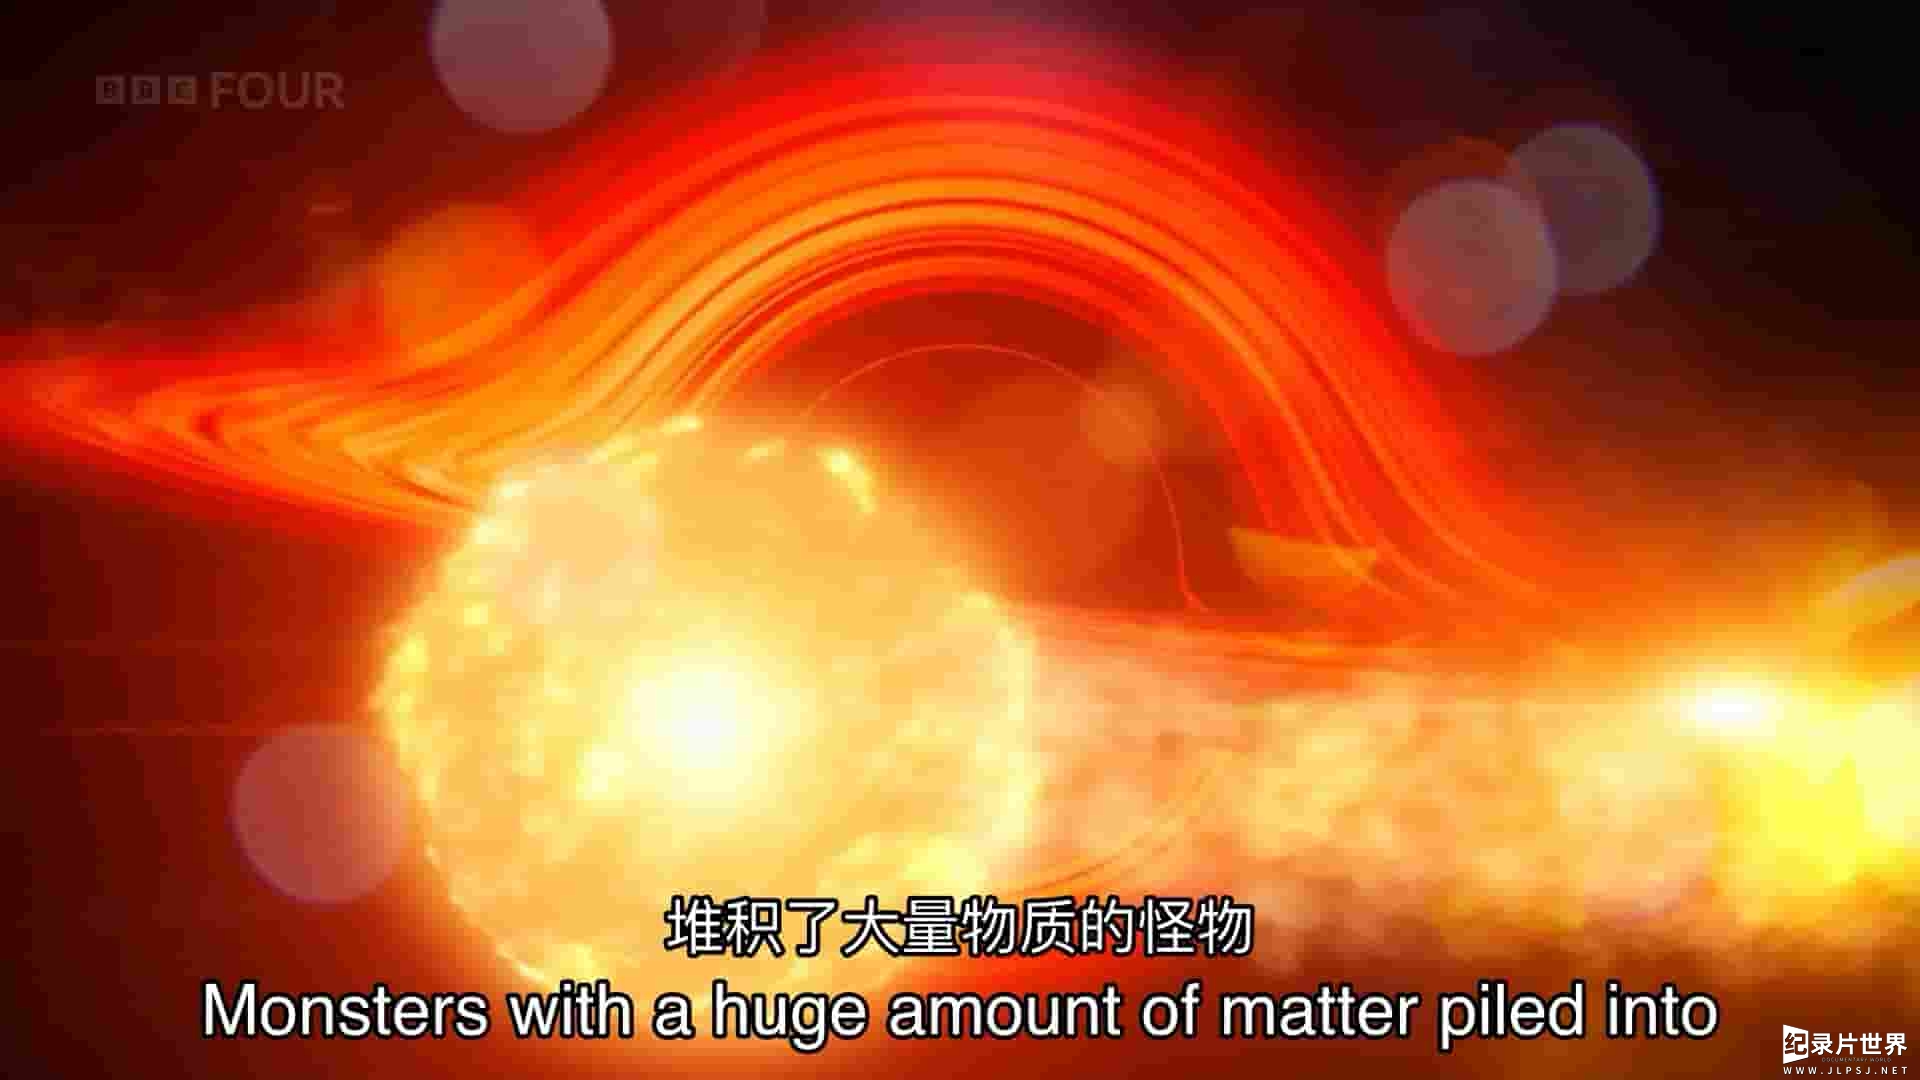 BBC纪录片《黑洞：寻找未知 Sky at Night - Black Holes: Searching for the Unknown 2023》全1集 